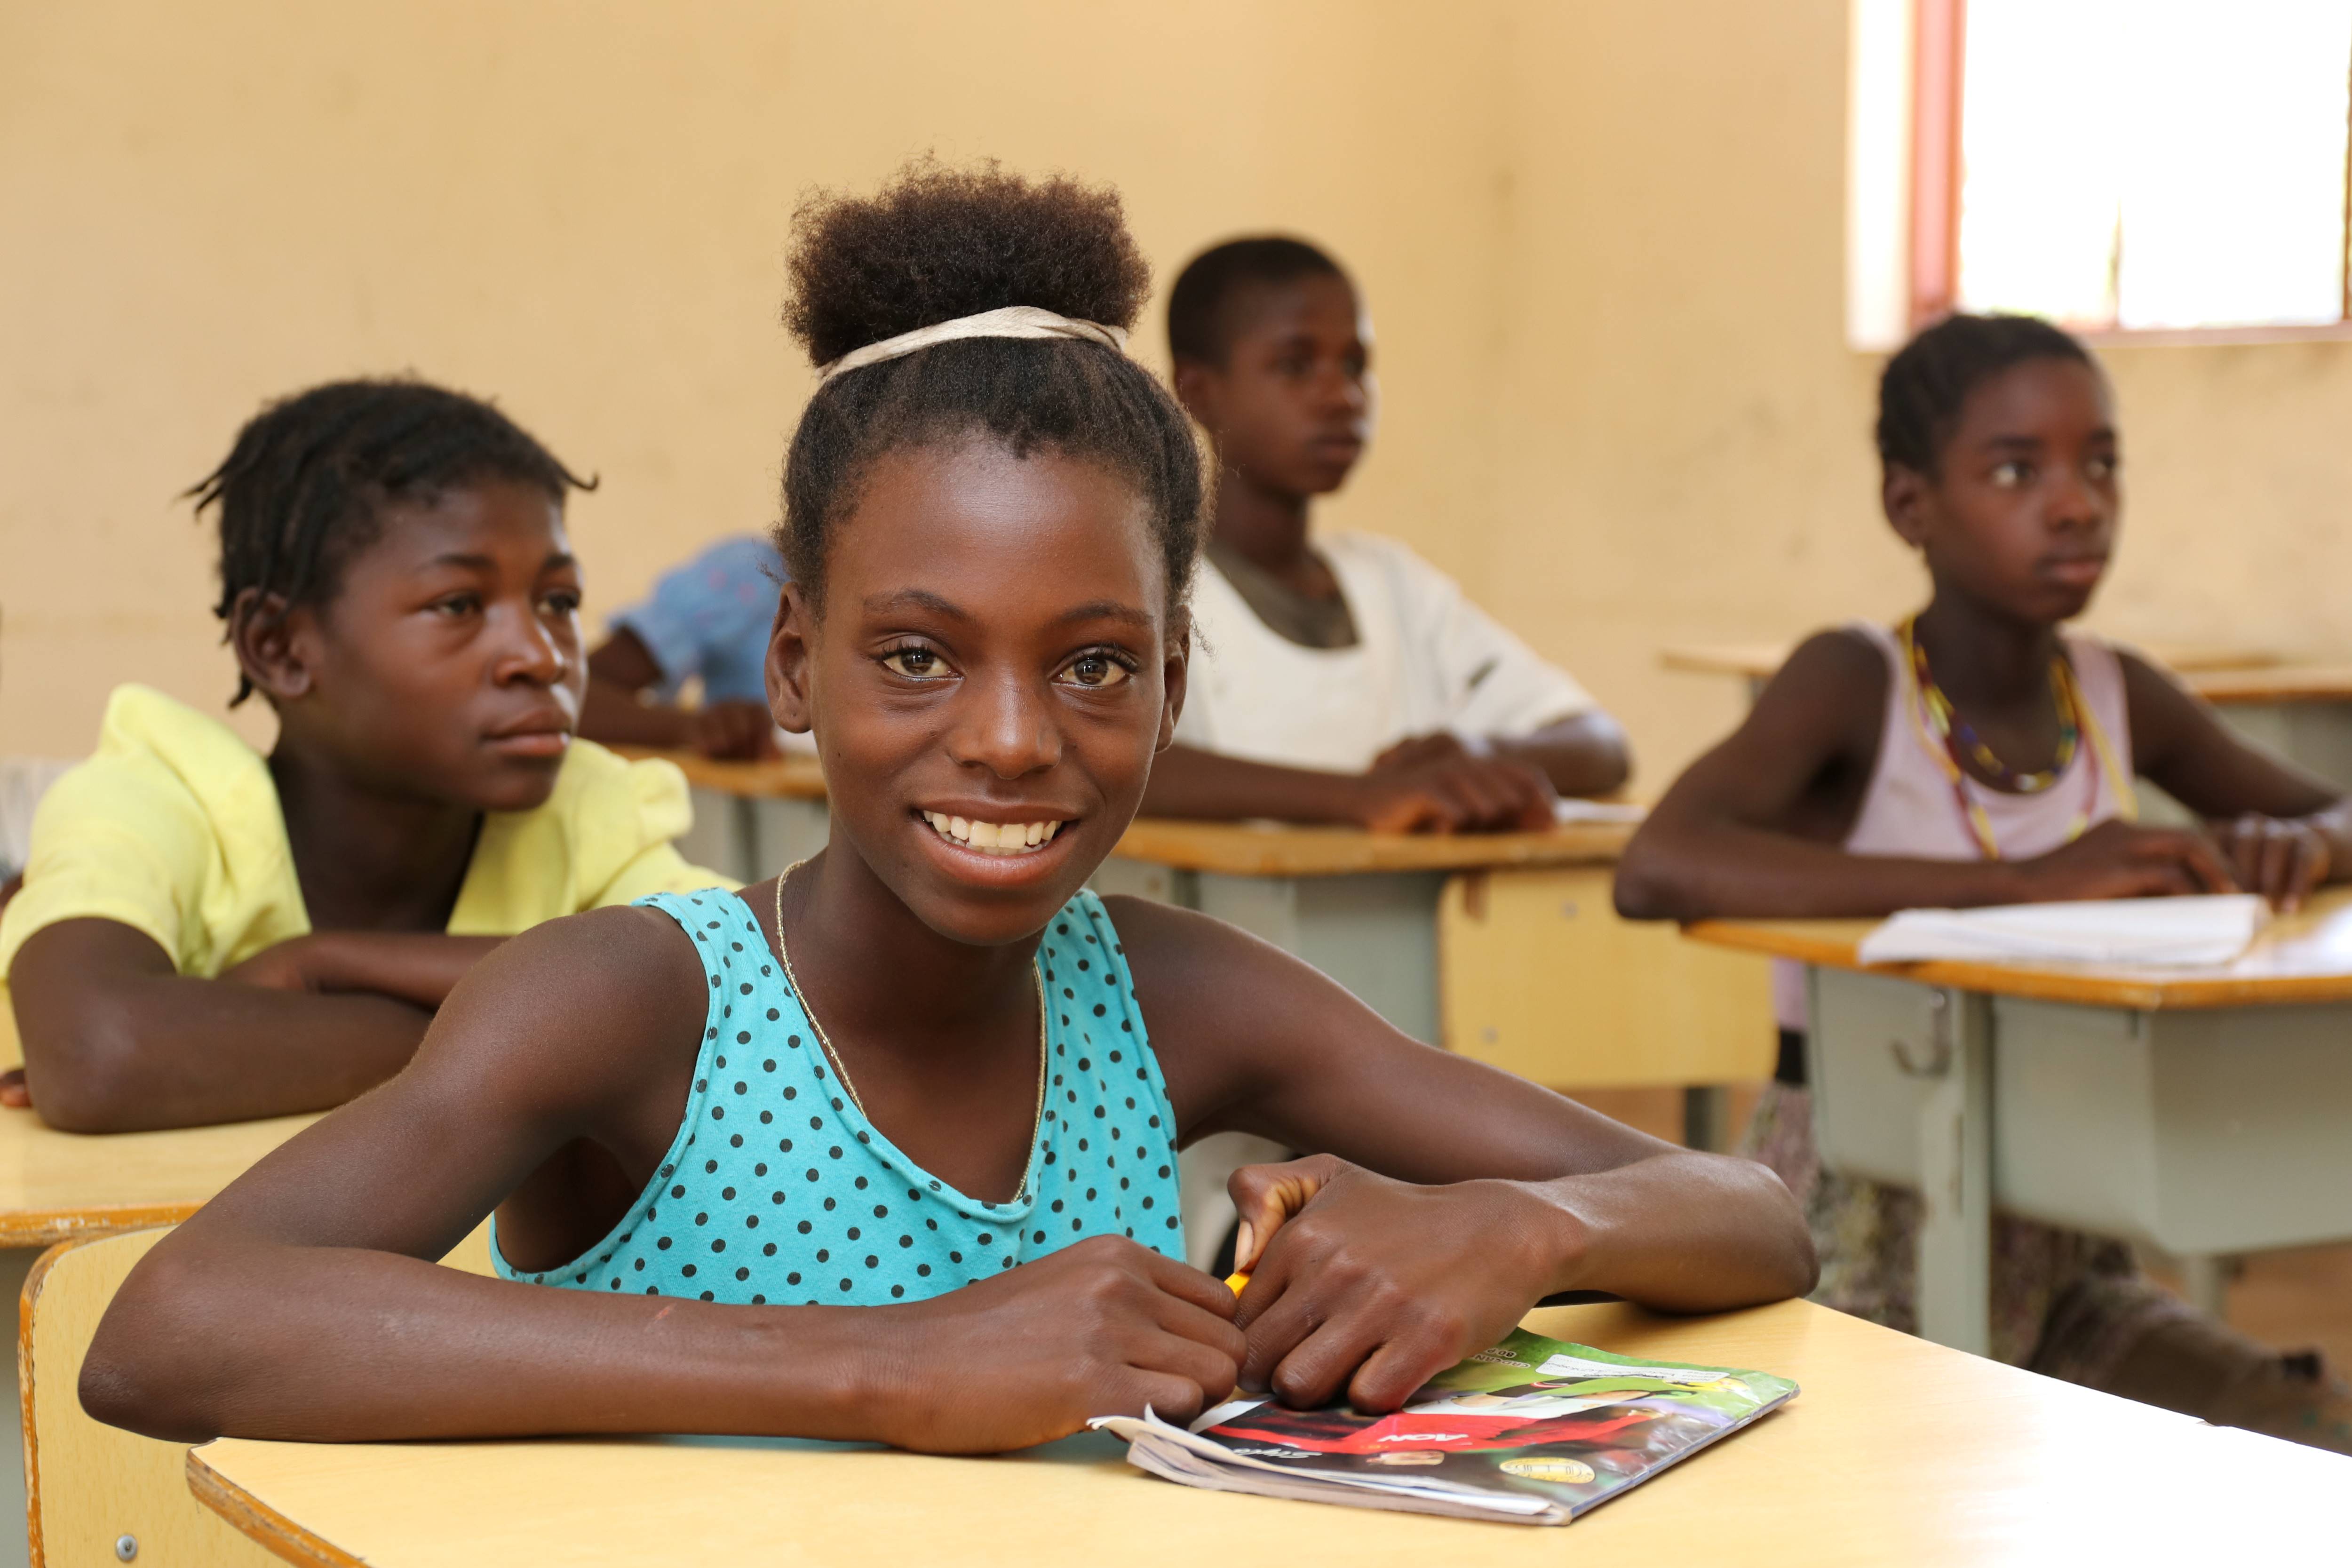 Education is so important for girls because it can open their minds to life’s possibilities